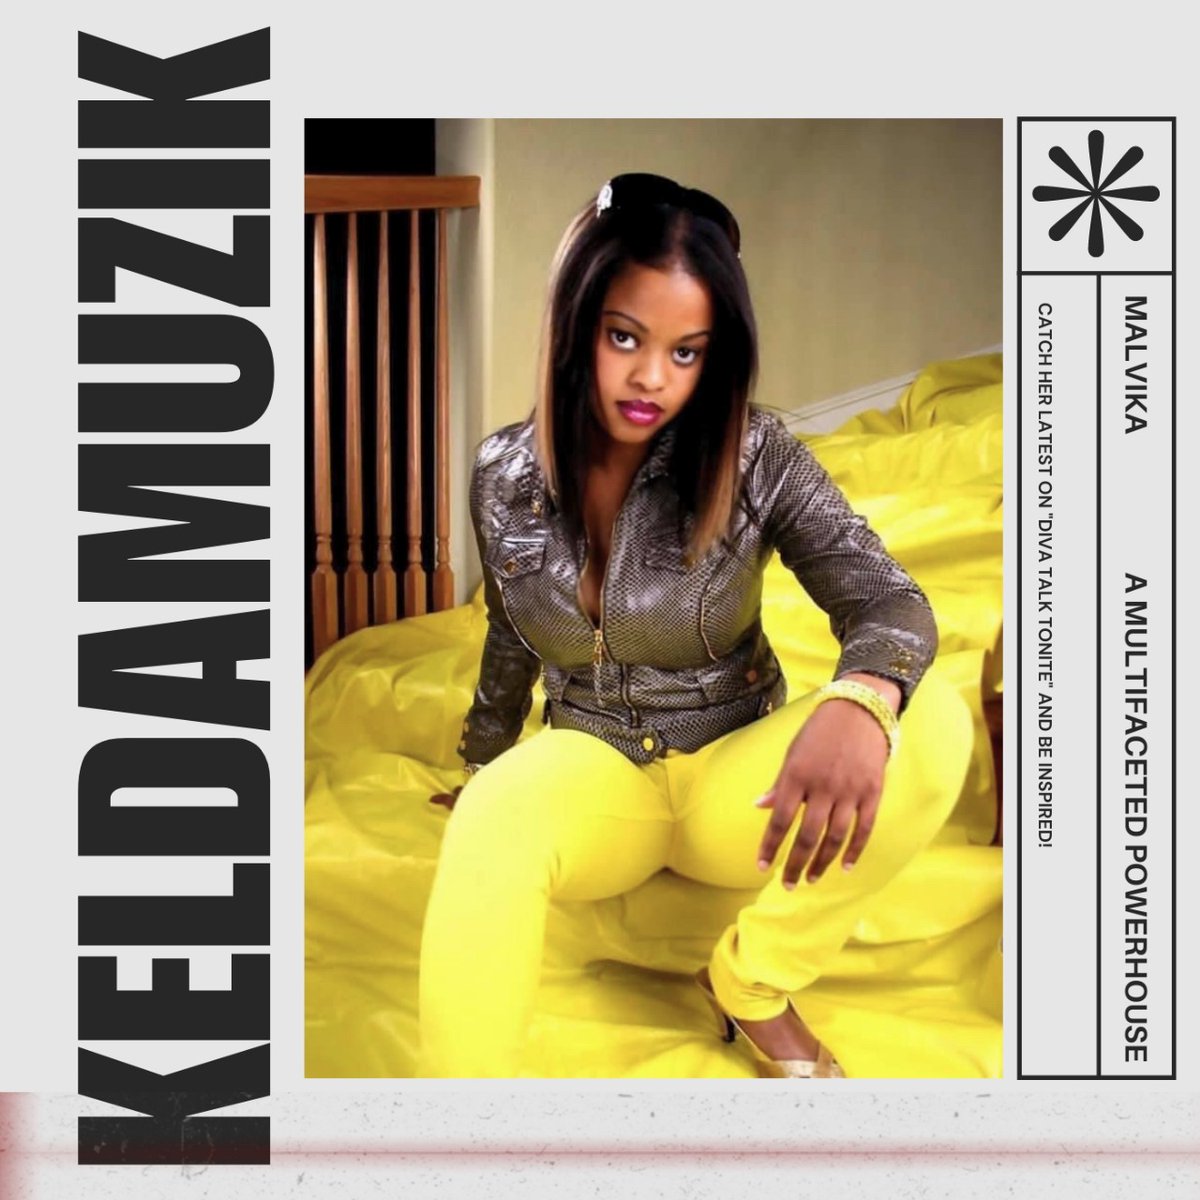 🌟 Meet Keldamuzik, the unstoppable force in entertainment! From chart-topping hits to unforgettable screen appearances, she does it all. Dive into the story of this multifaceted powerhouse featured by Malvika Padin. 🎤🎬 #Keldamuzik #NewMusic #EntertainmentNews #WomenInMusic